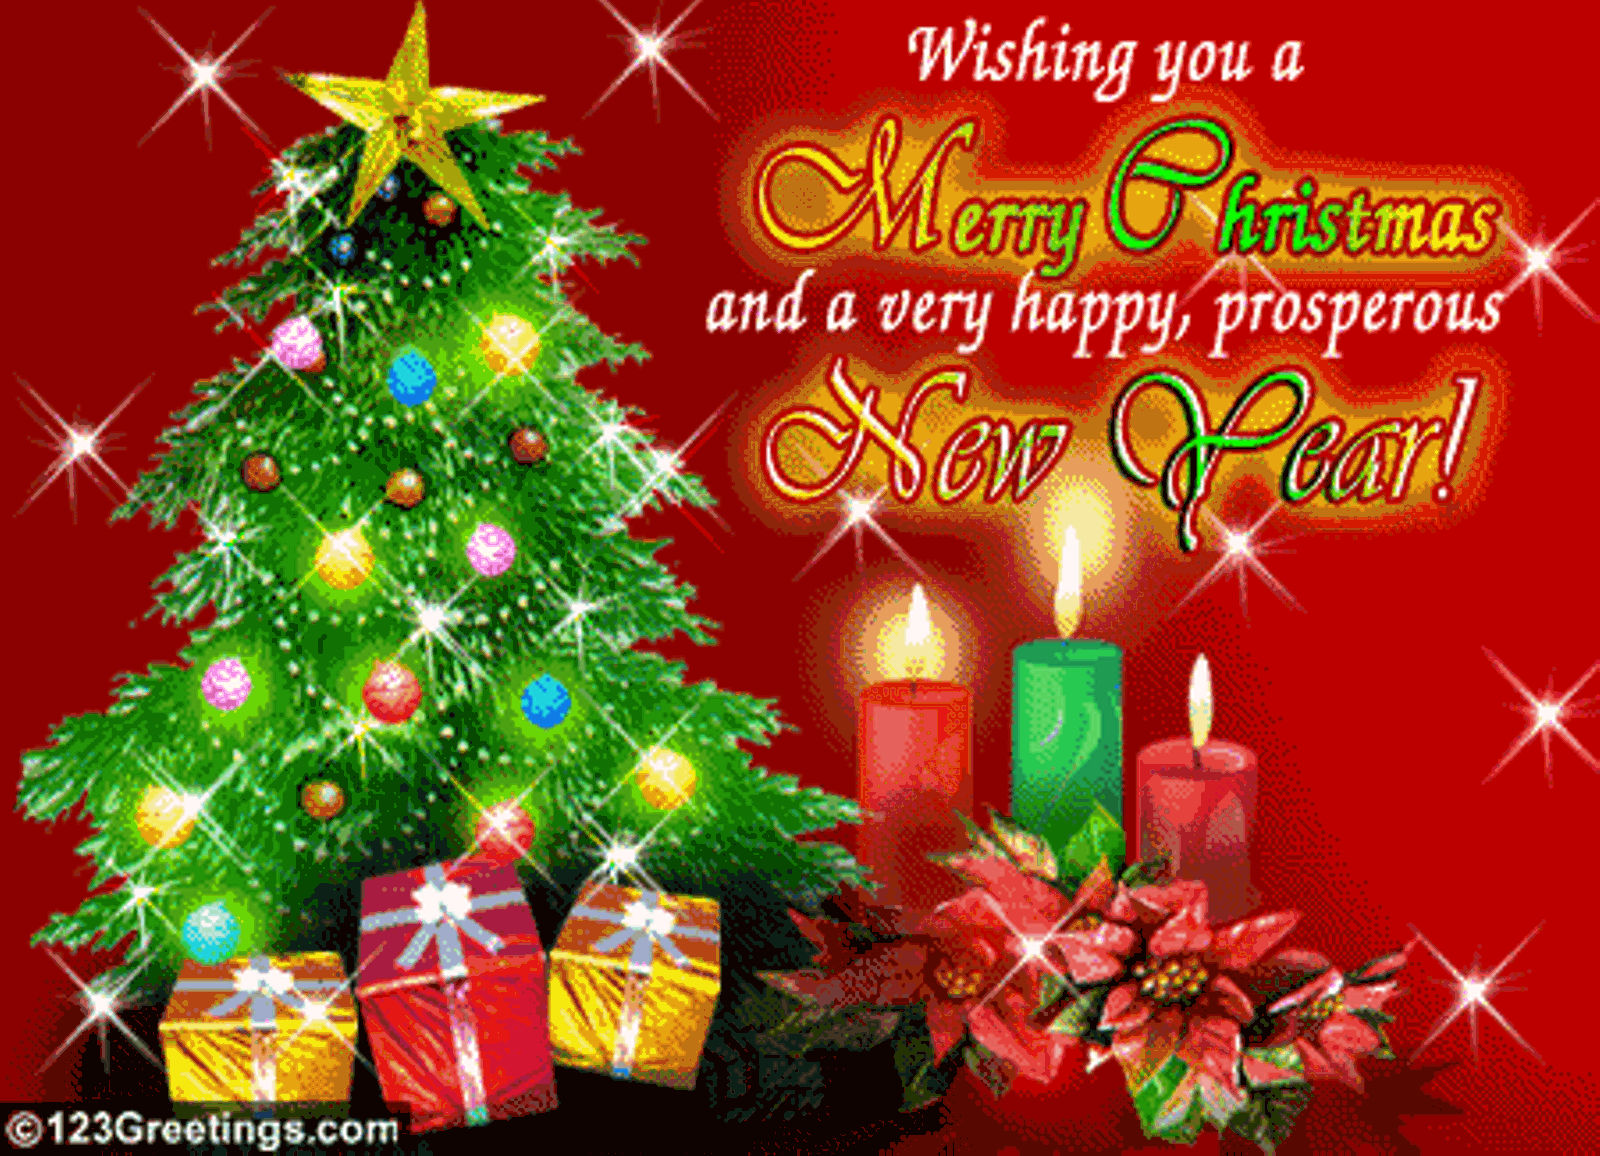 merry christmas ecards free download Christmas merry cards greetings ...